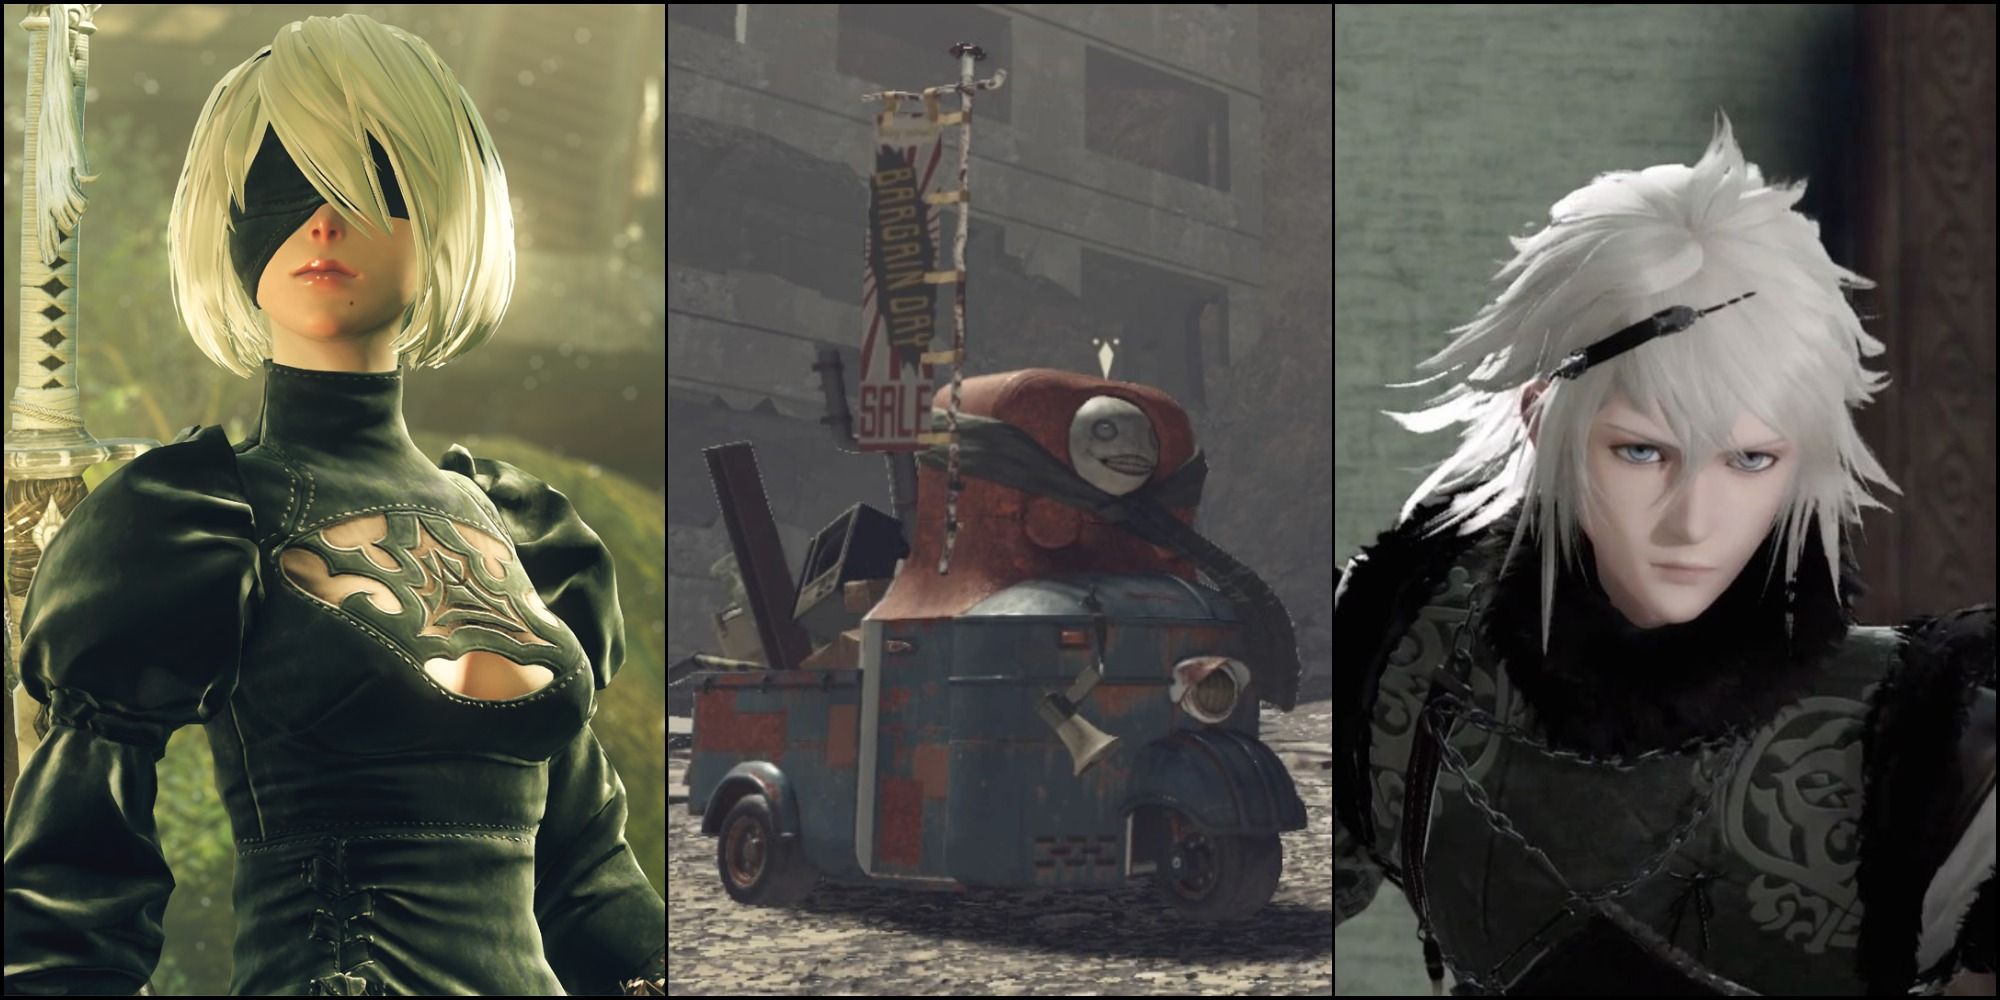 NieR: Automata Anime Plot, Cast & Number of Episodes